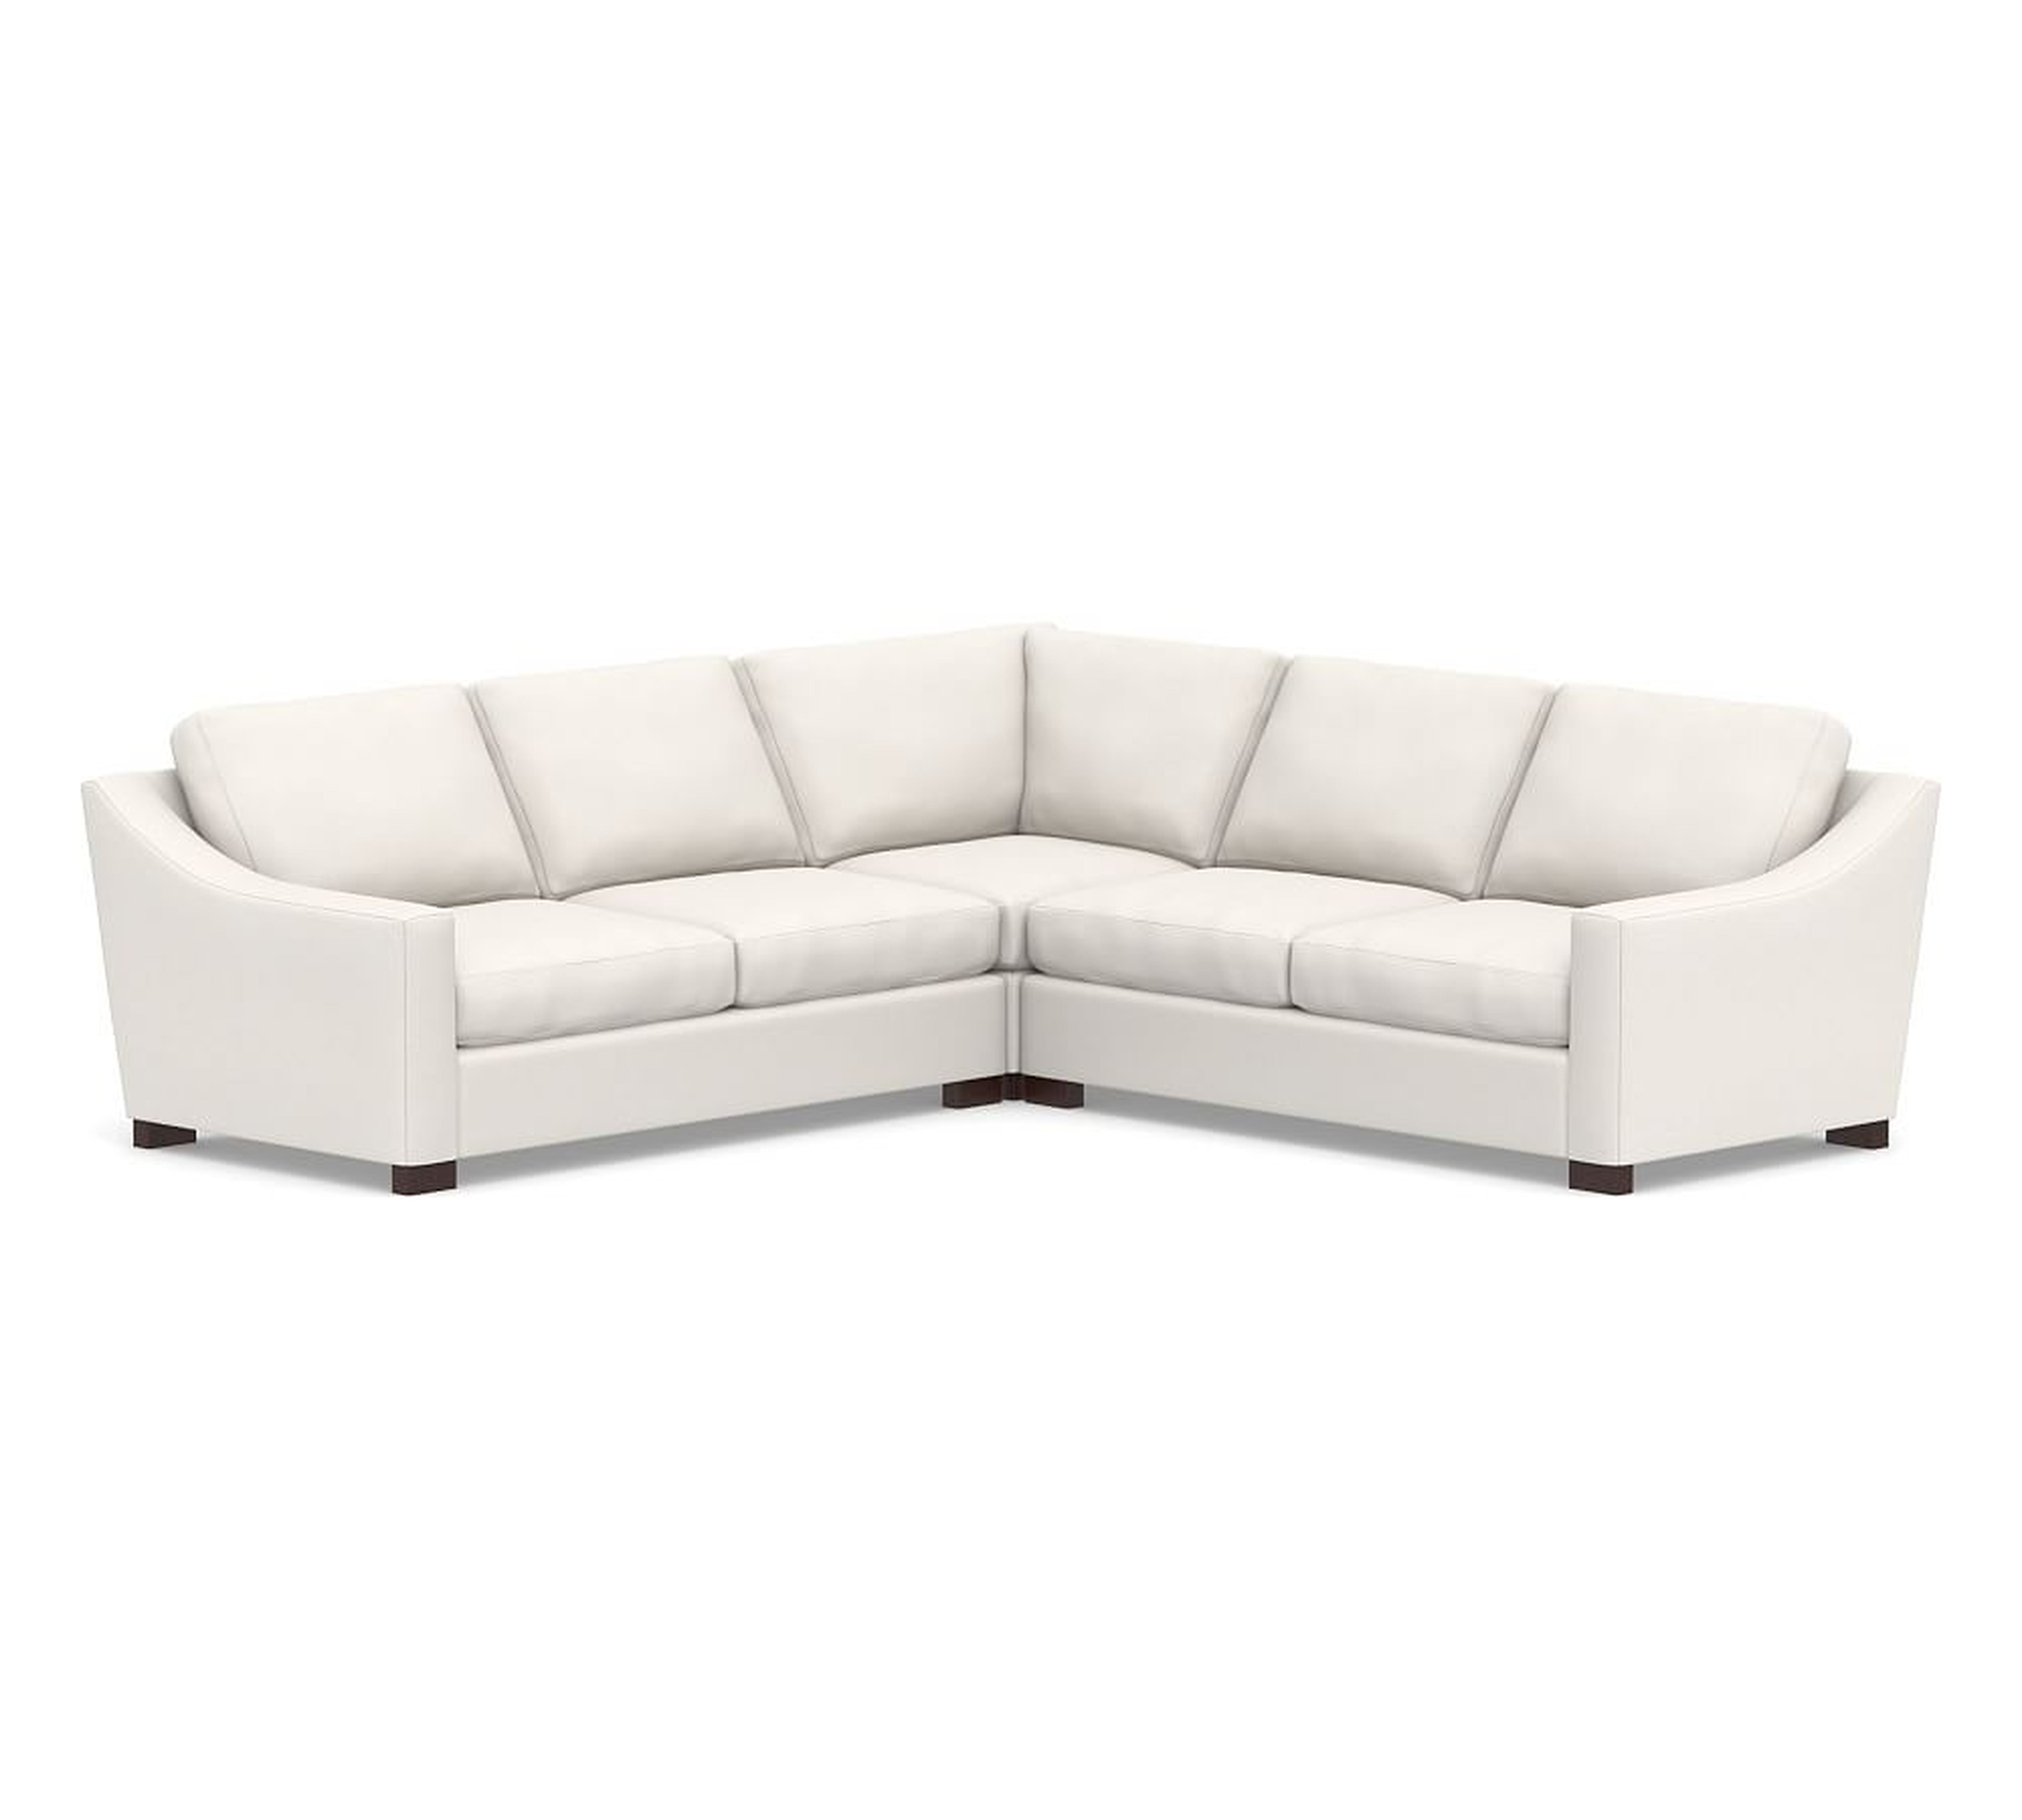 Turner Slope Arm Upholstered 3-Piece L-Shaped Corner Sectional, Down Blend Wrapped Cushions, Performance Everydaylinen(TM) by Crypton(R) Home Ivory - Pottery Barn